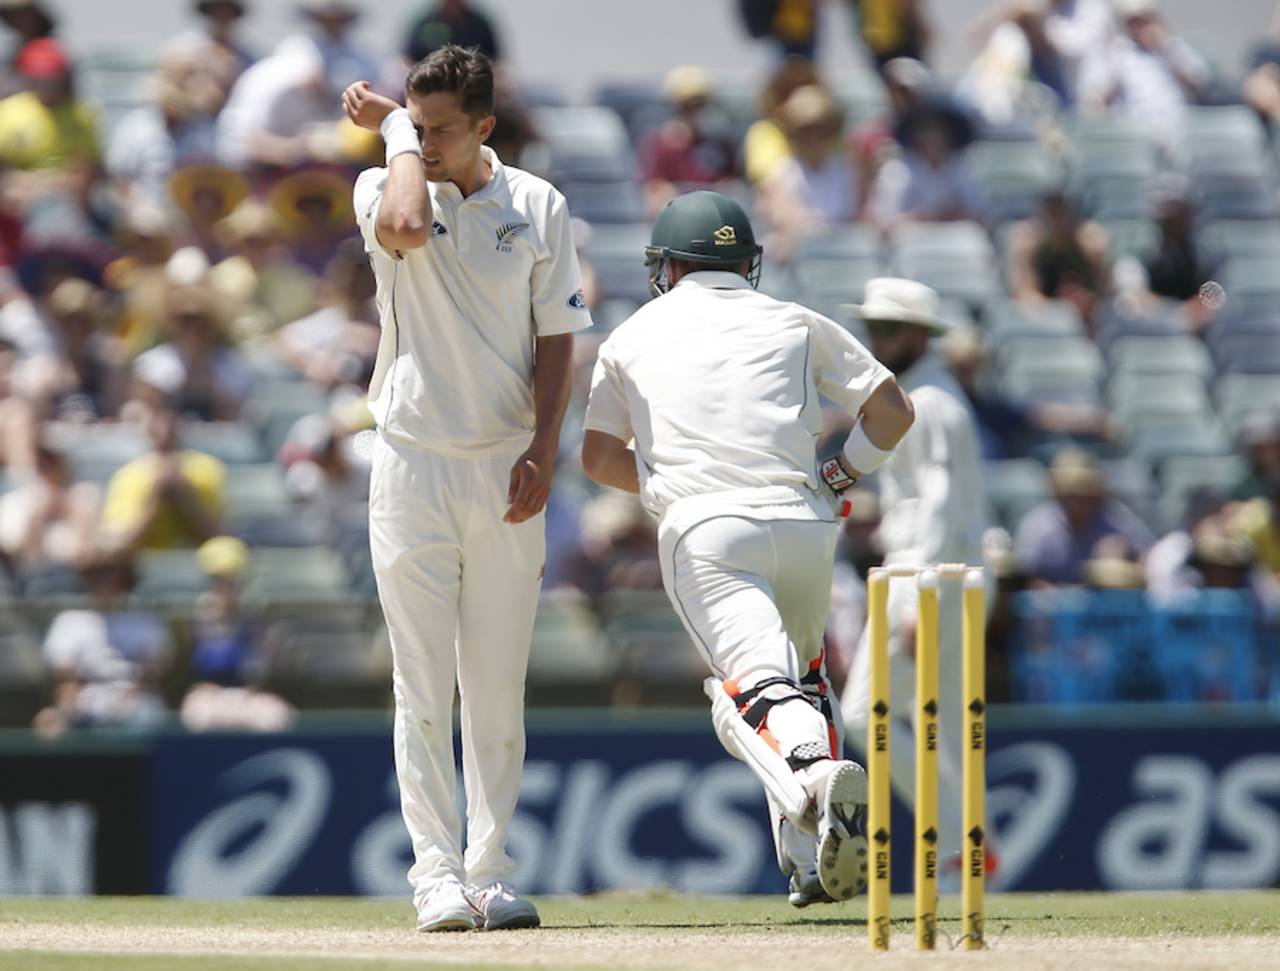 Trent Boult has been unable to really find his rhythm so far this series&nbsp;&nbsp;&bull;&nbsp;&nbsp;Associated Press